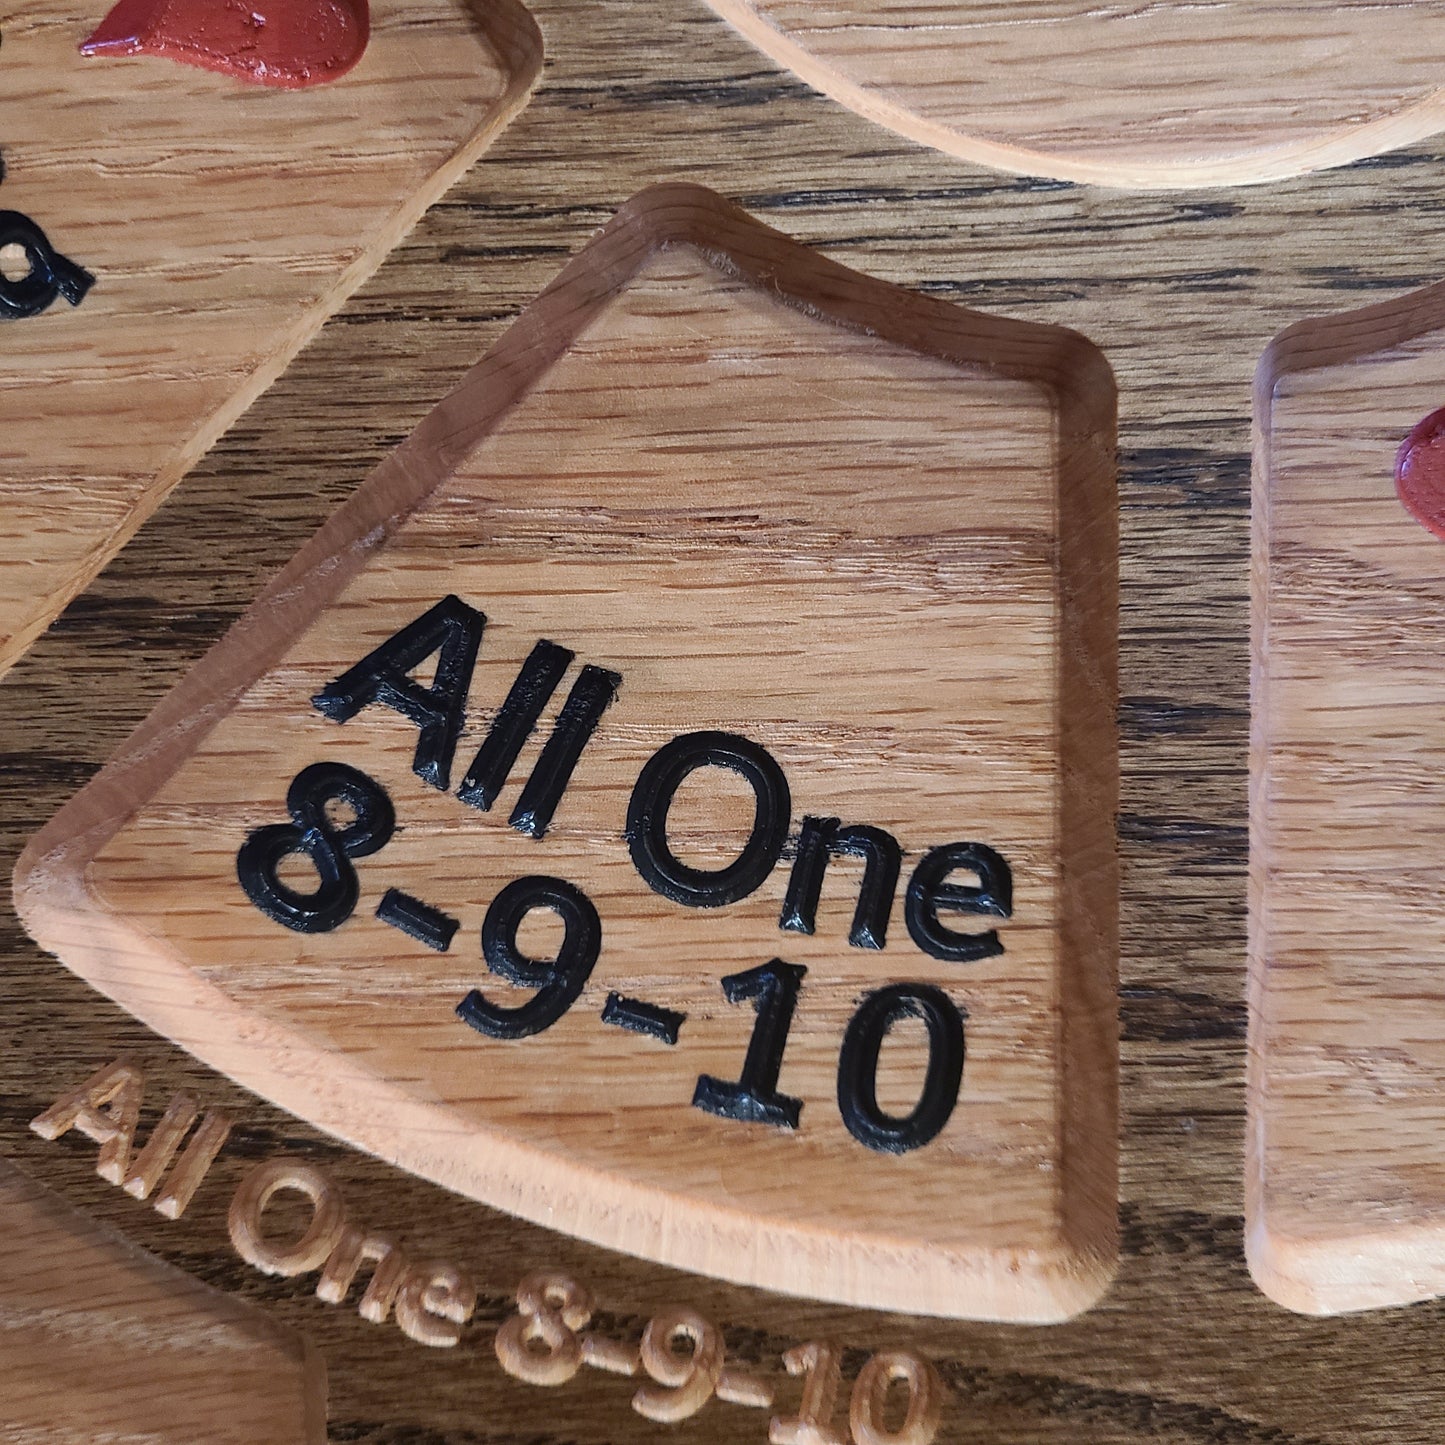 Limited Edition 16"x16" Solid Red Oak Tripoli, Michigan Rummy or Rummoli Board (8-9-10 without Turn Table)